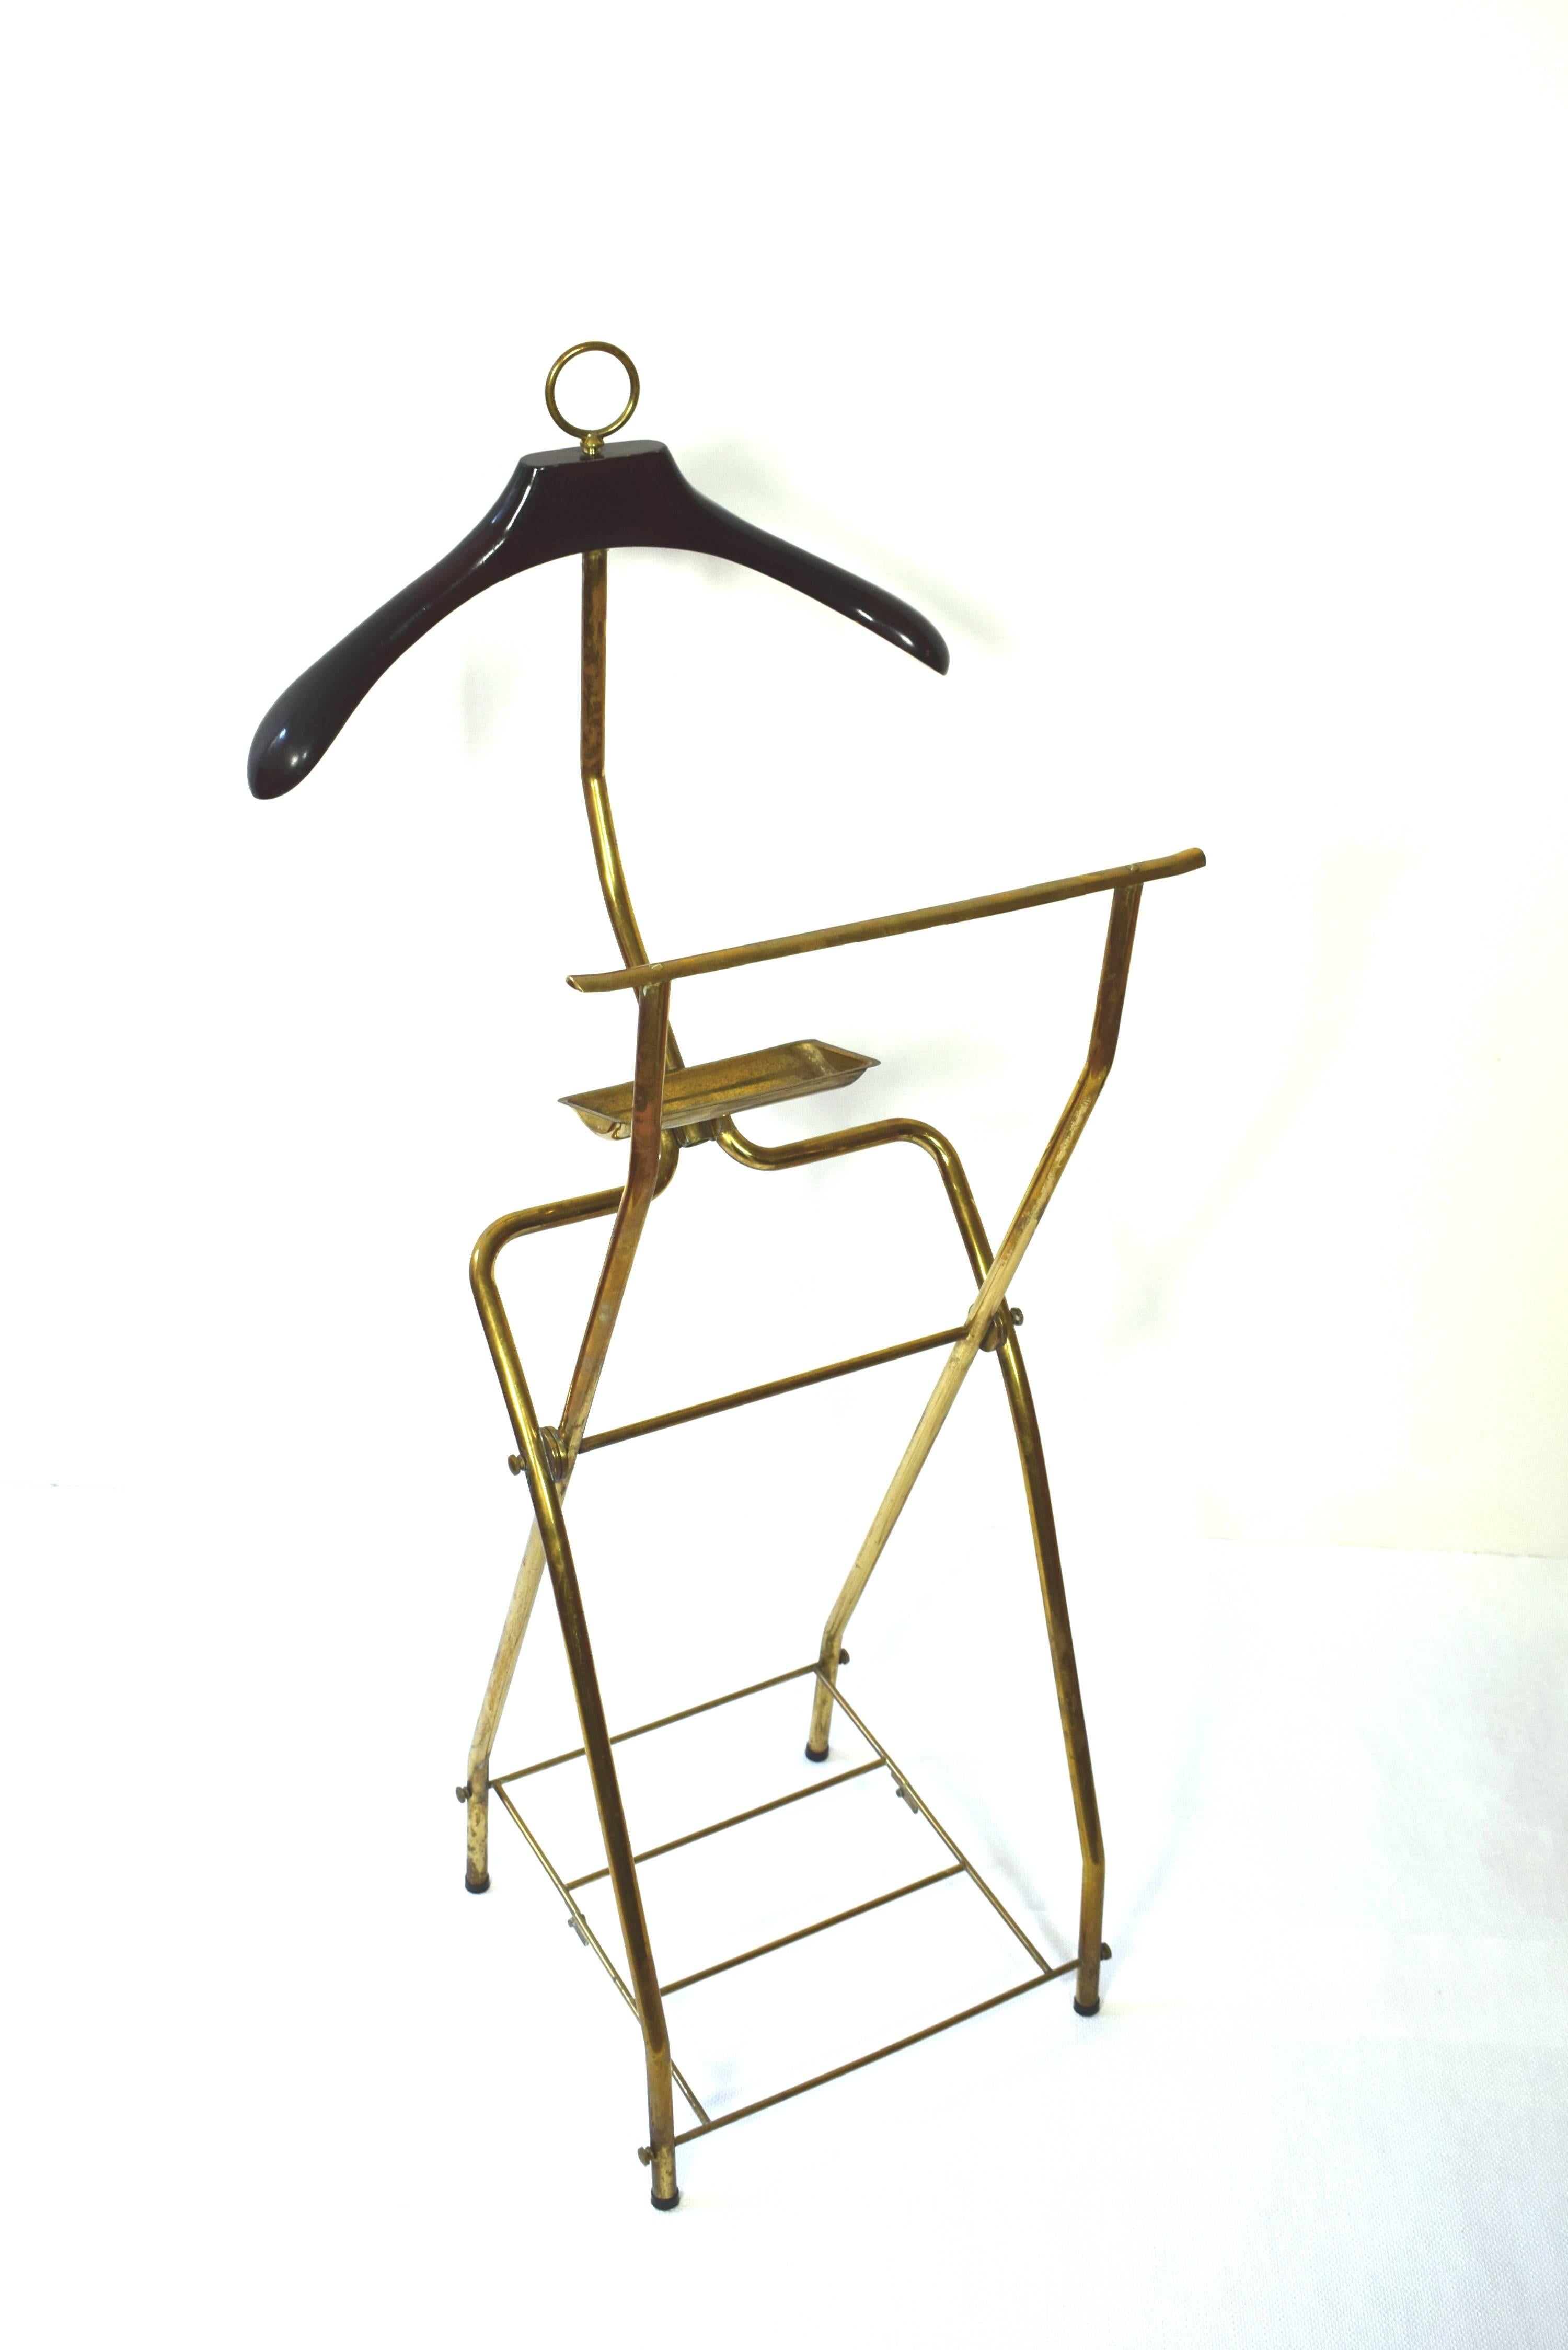 Italian Mid-Century Modern Brass Valet In Good Condition For Sale In Wien, AT